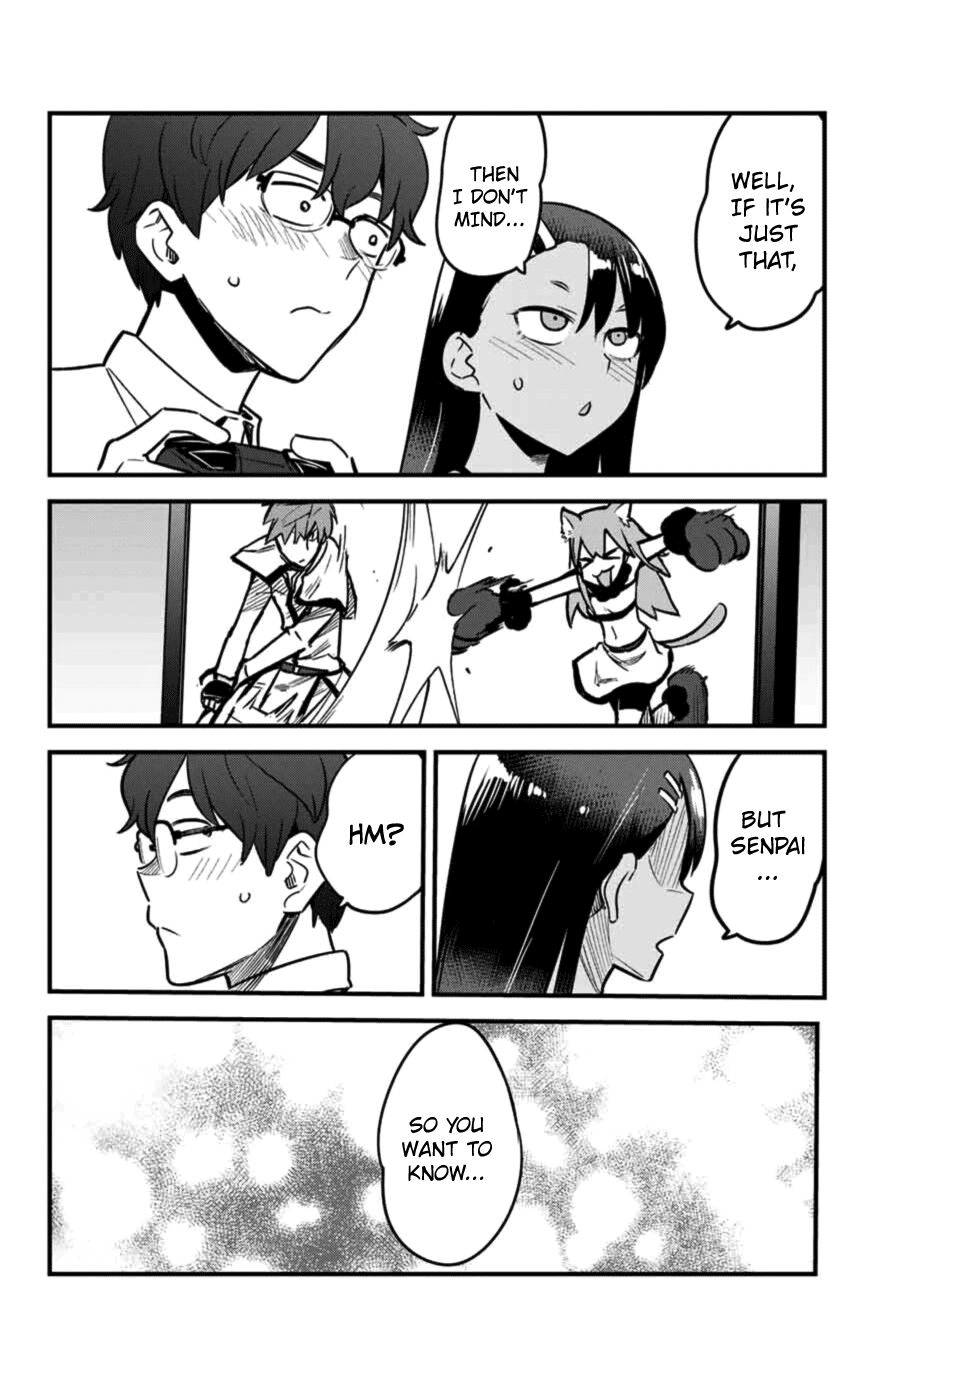 Ijiranaide, Nagatoro-San Vol.8 Chapter 62: So You Want To Know... My Name... Senpai!! - Picture 2